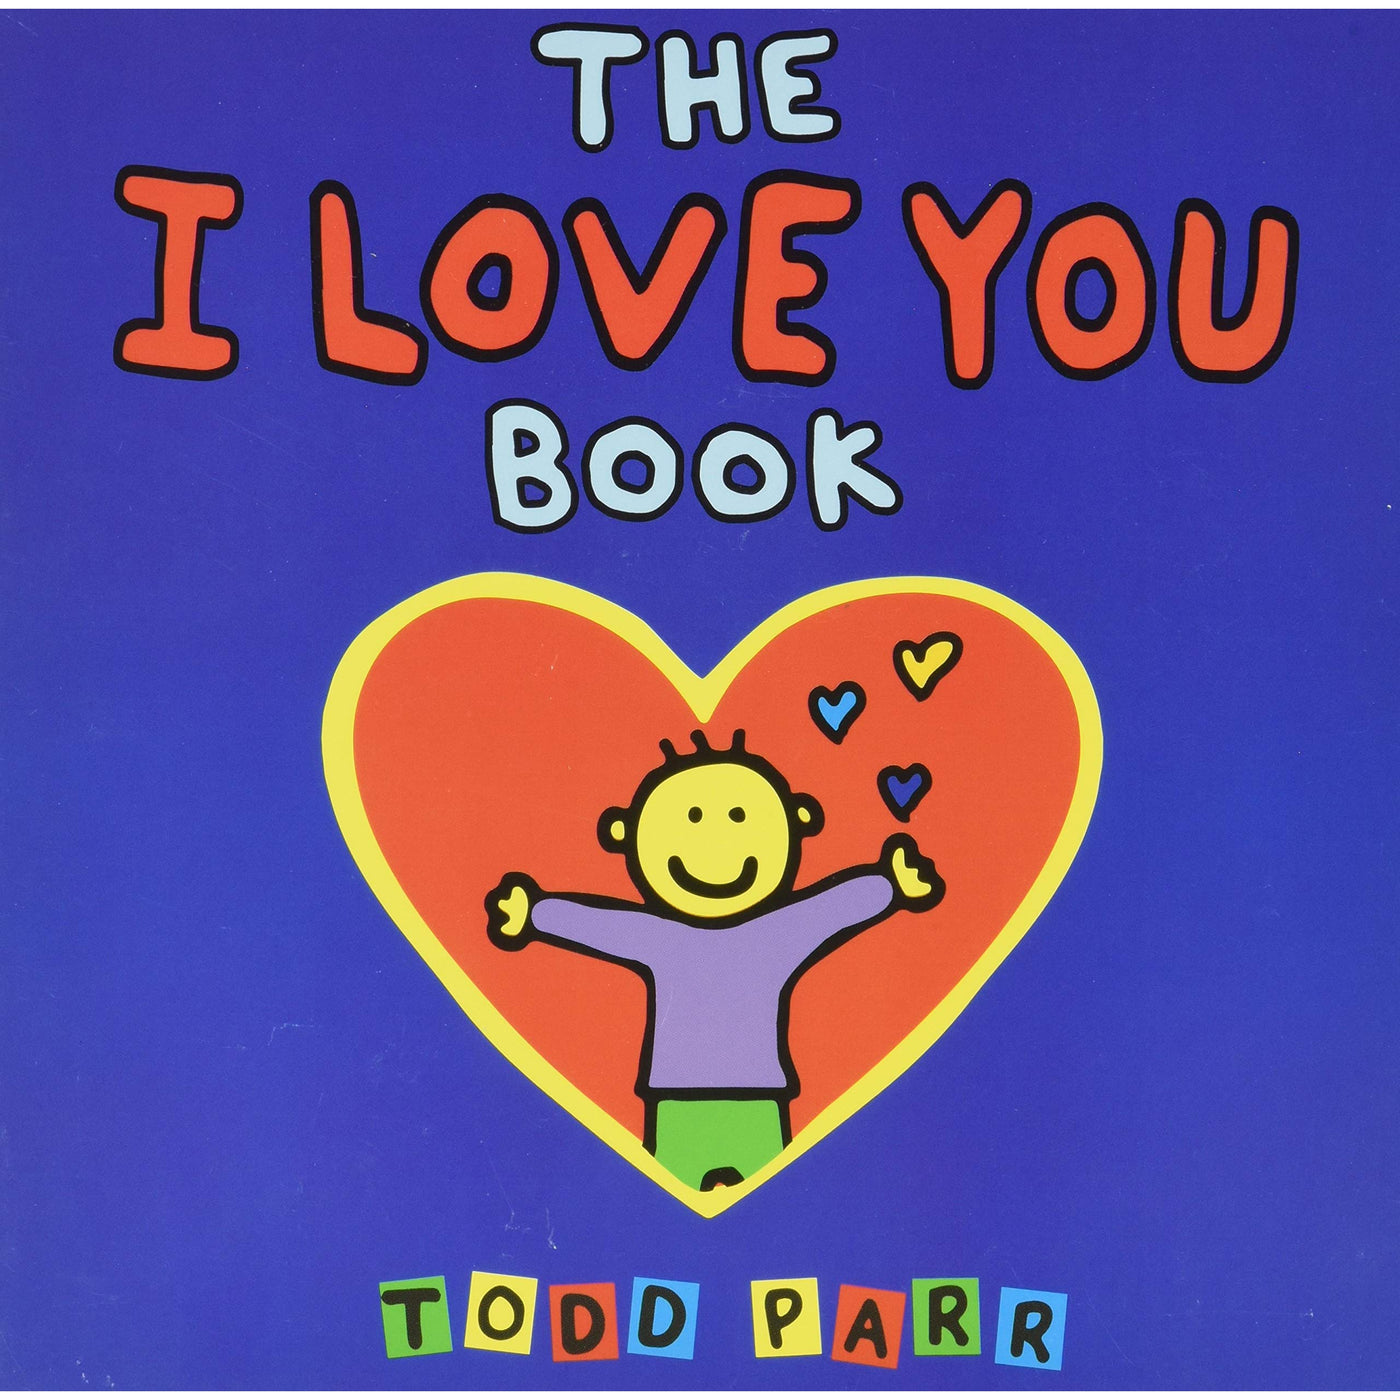 Todd Parr: The I Love You Book